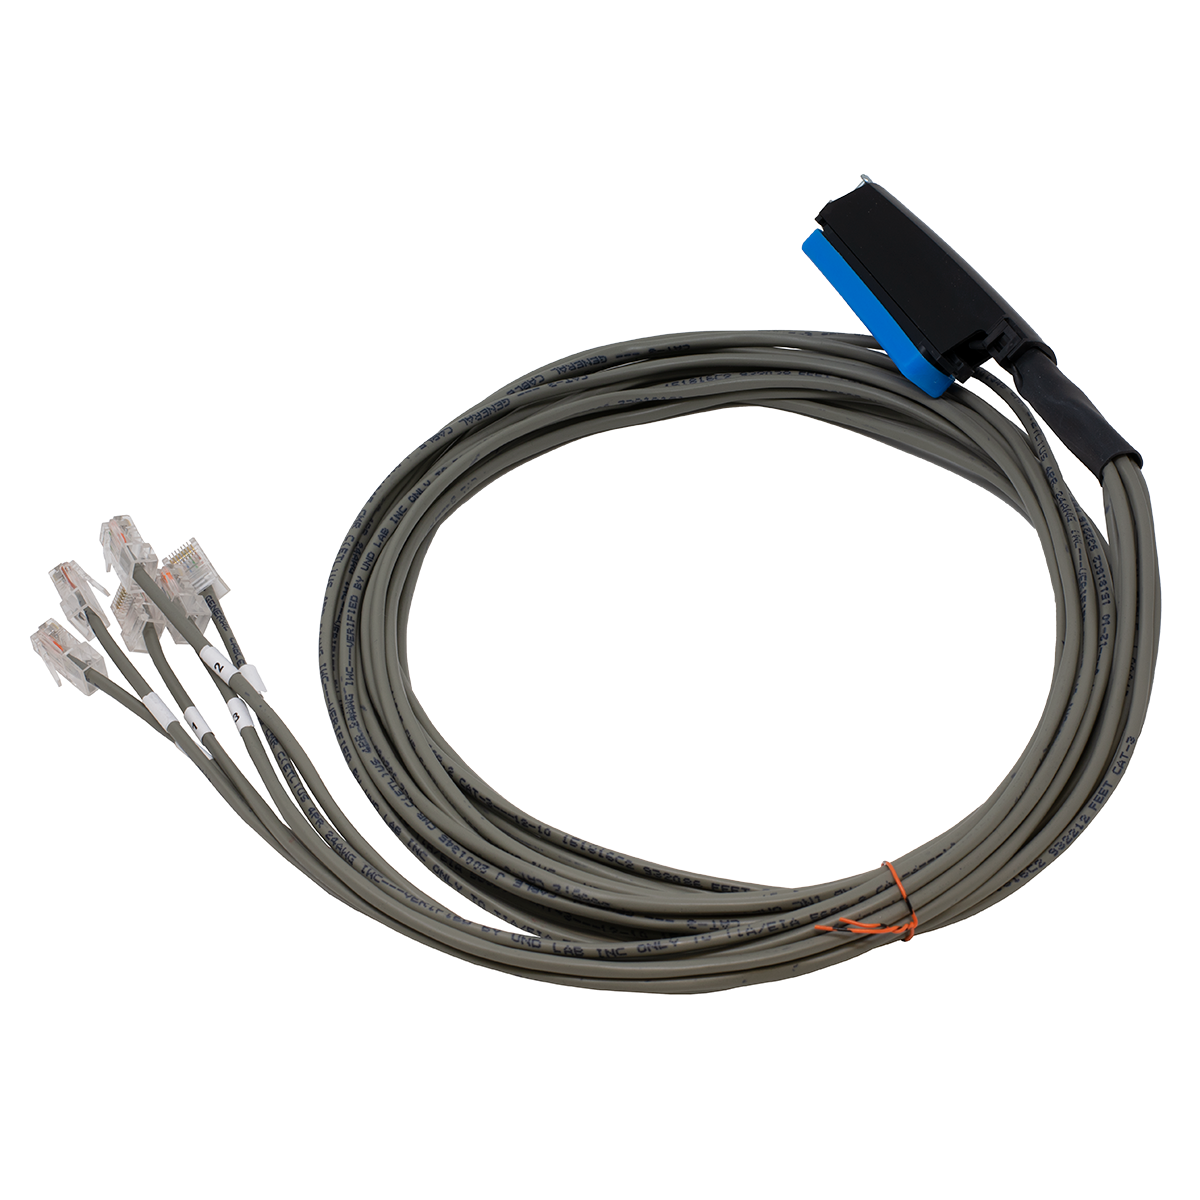 QWIK 6' 6x8 WECO Cable with Male Amp